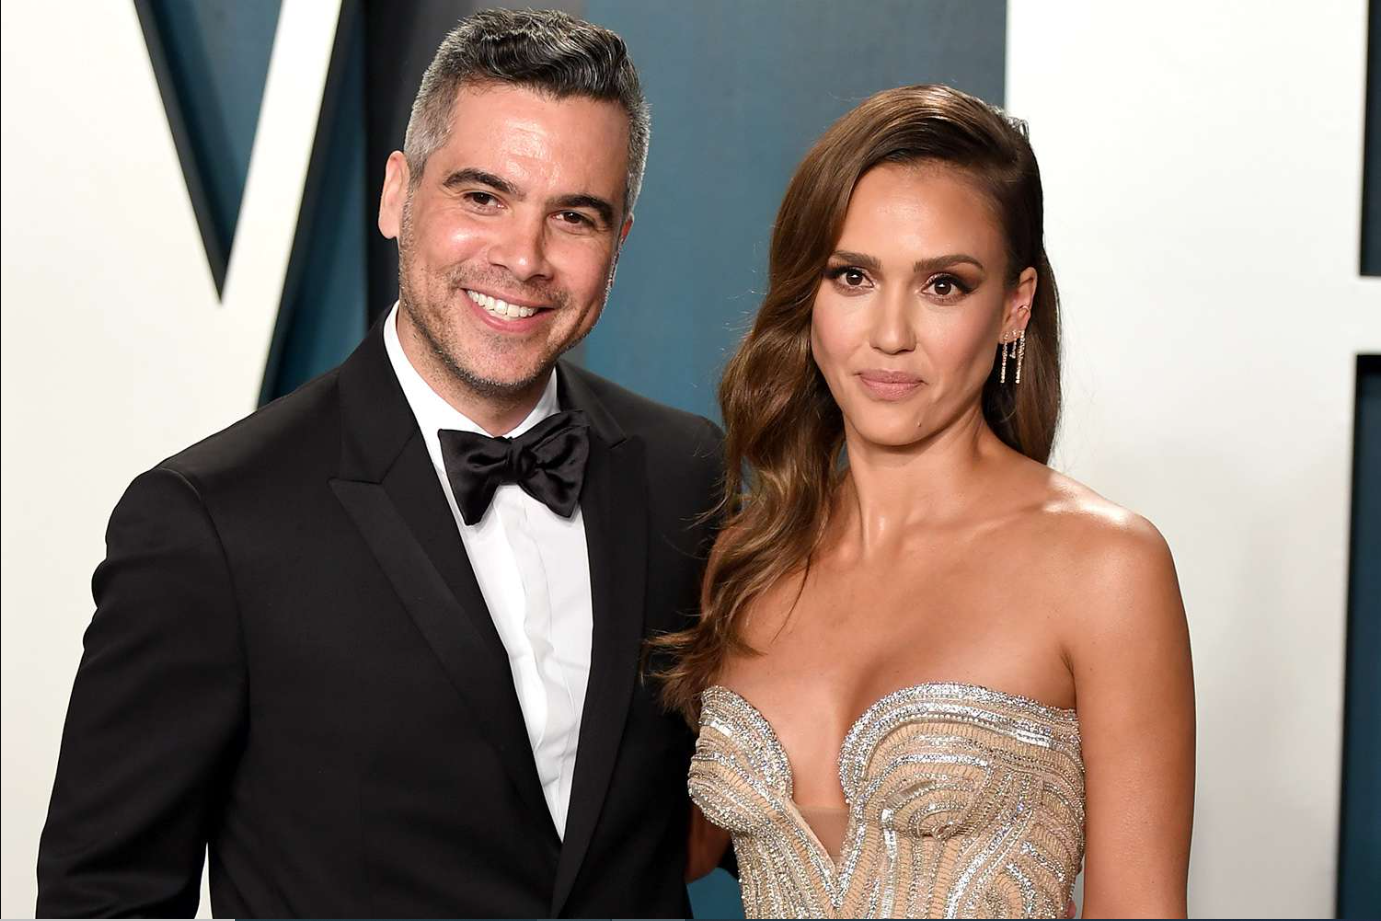 Who is Jessica Alba husband? Find out everything you need to know about Cash Warren and their love story in this article.